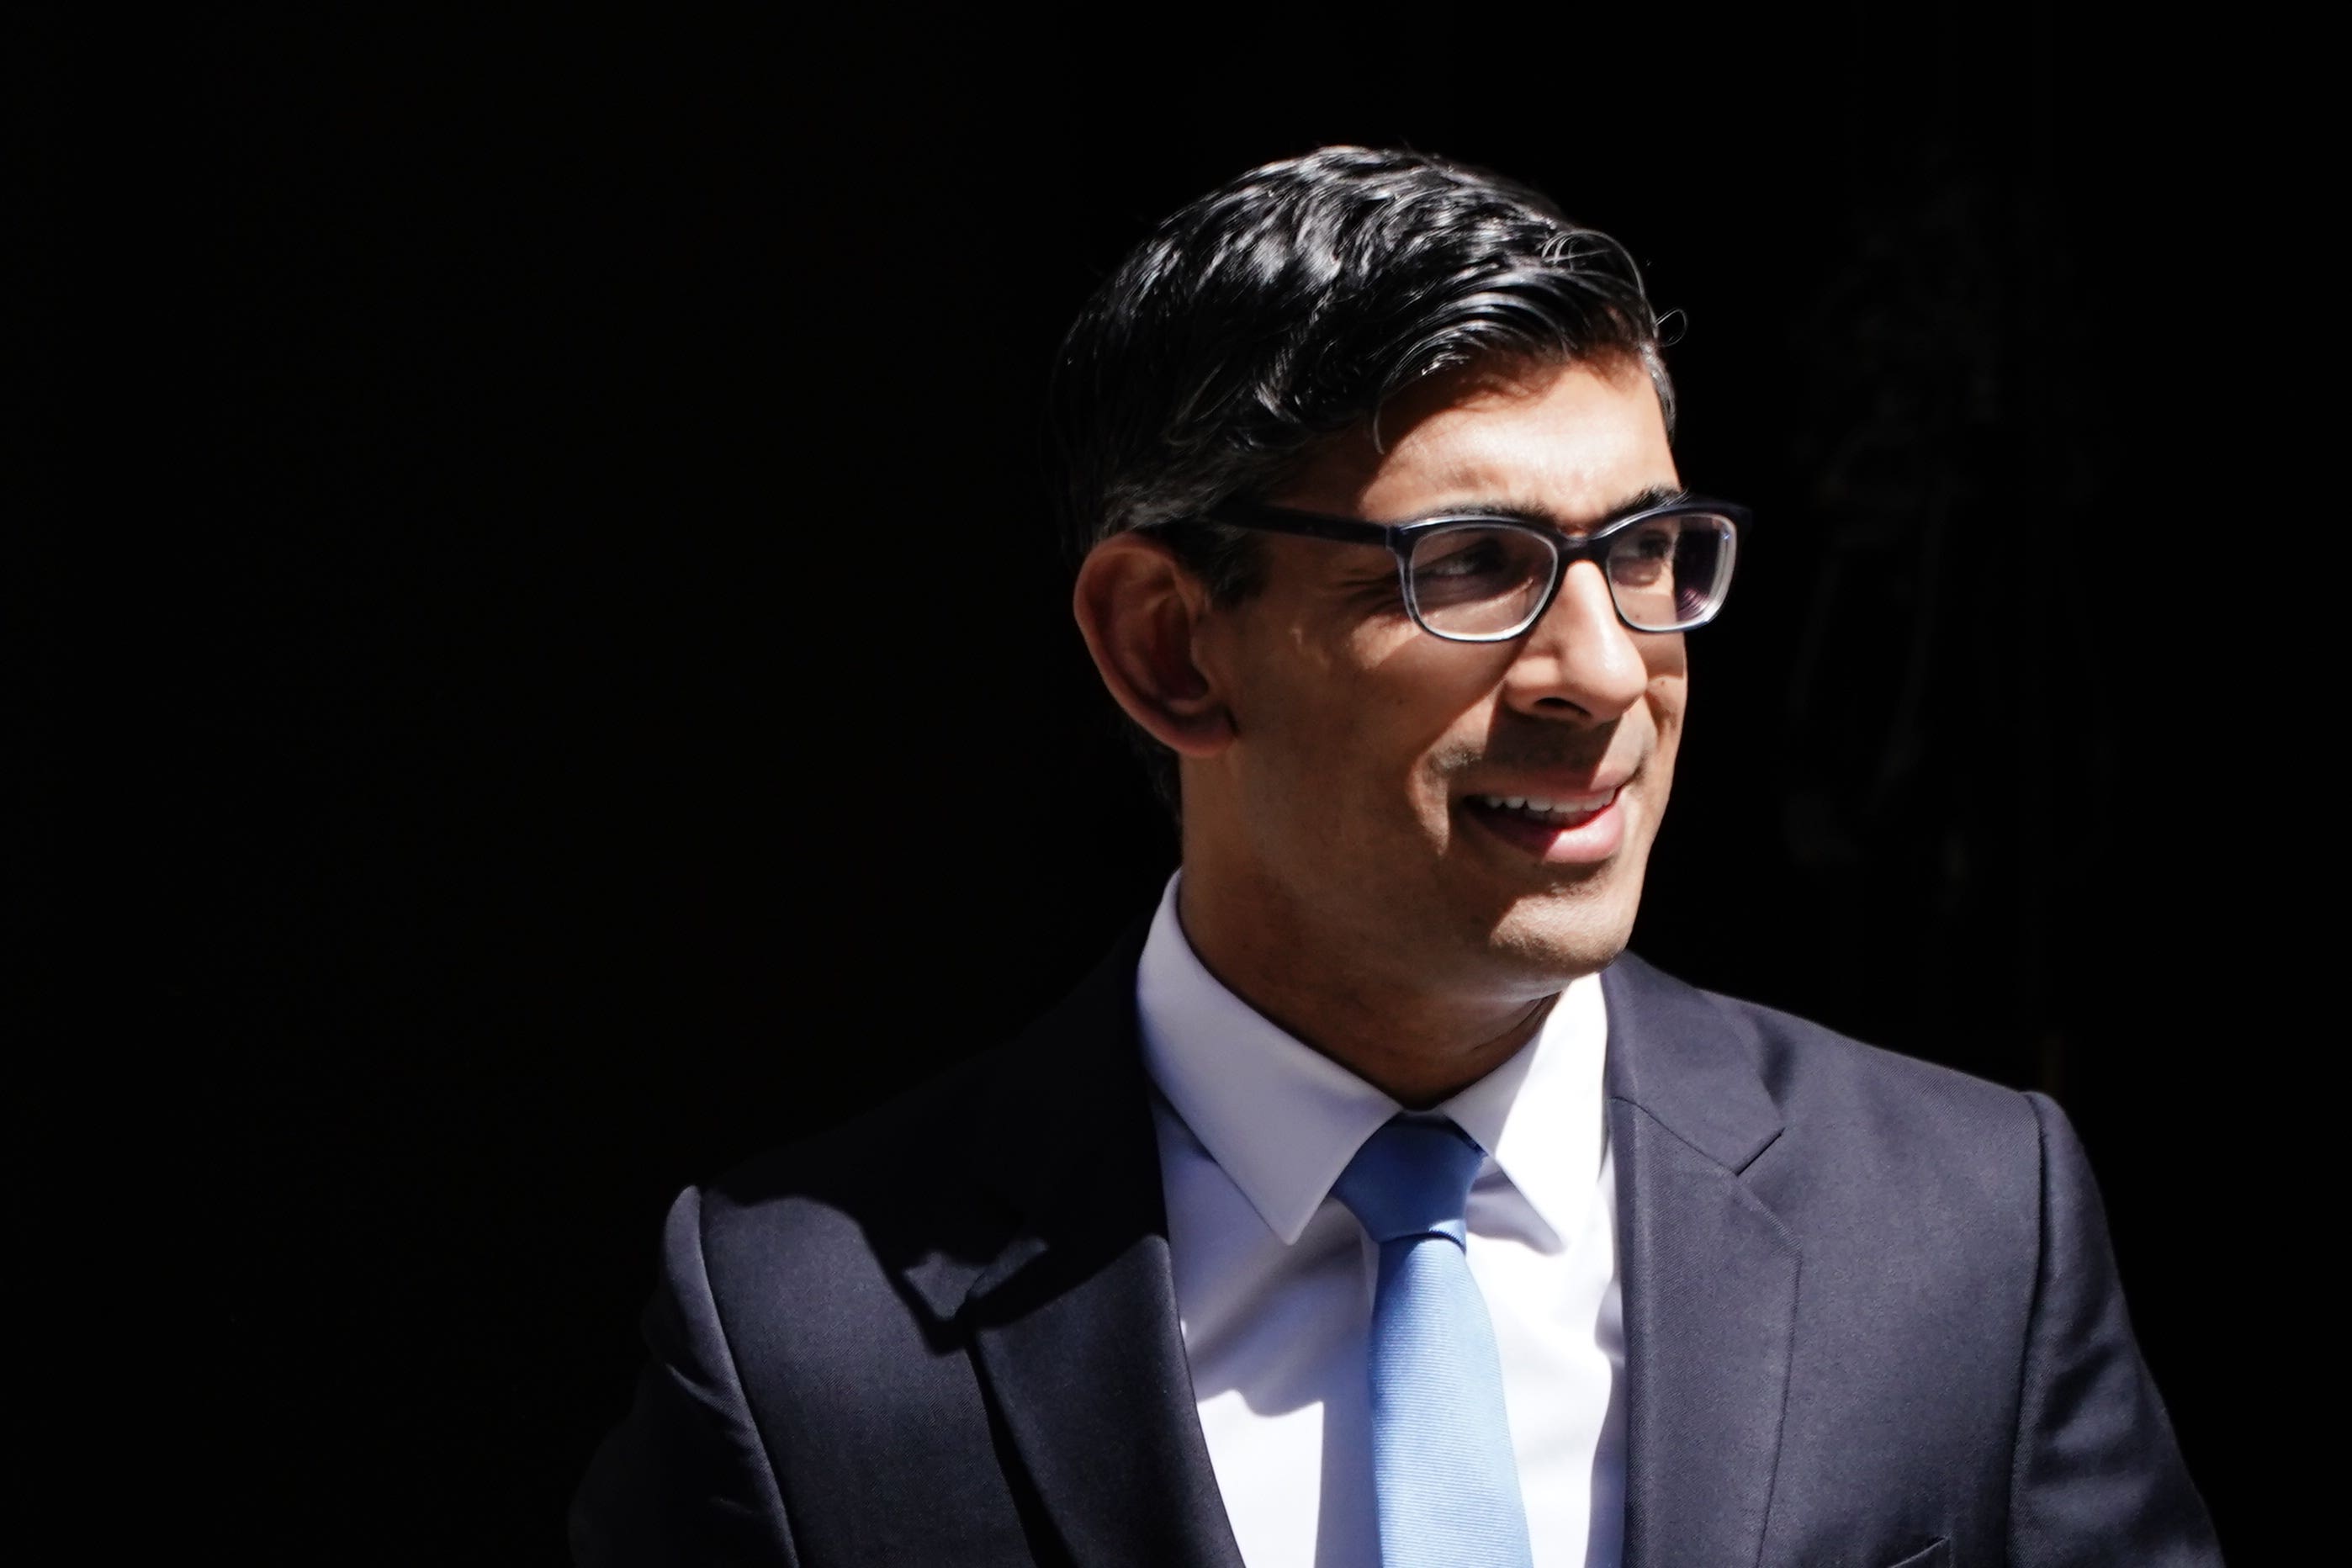 Prime Minister Rishi Sunak is apparently popular among millenials, claims the new report